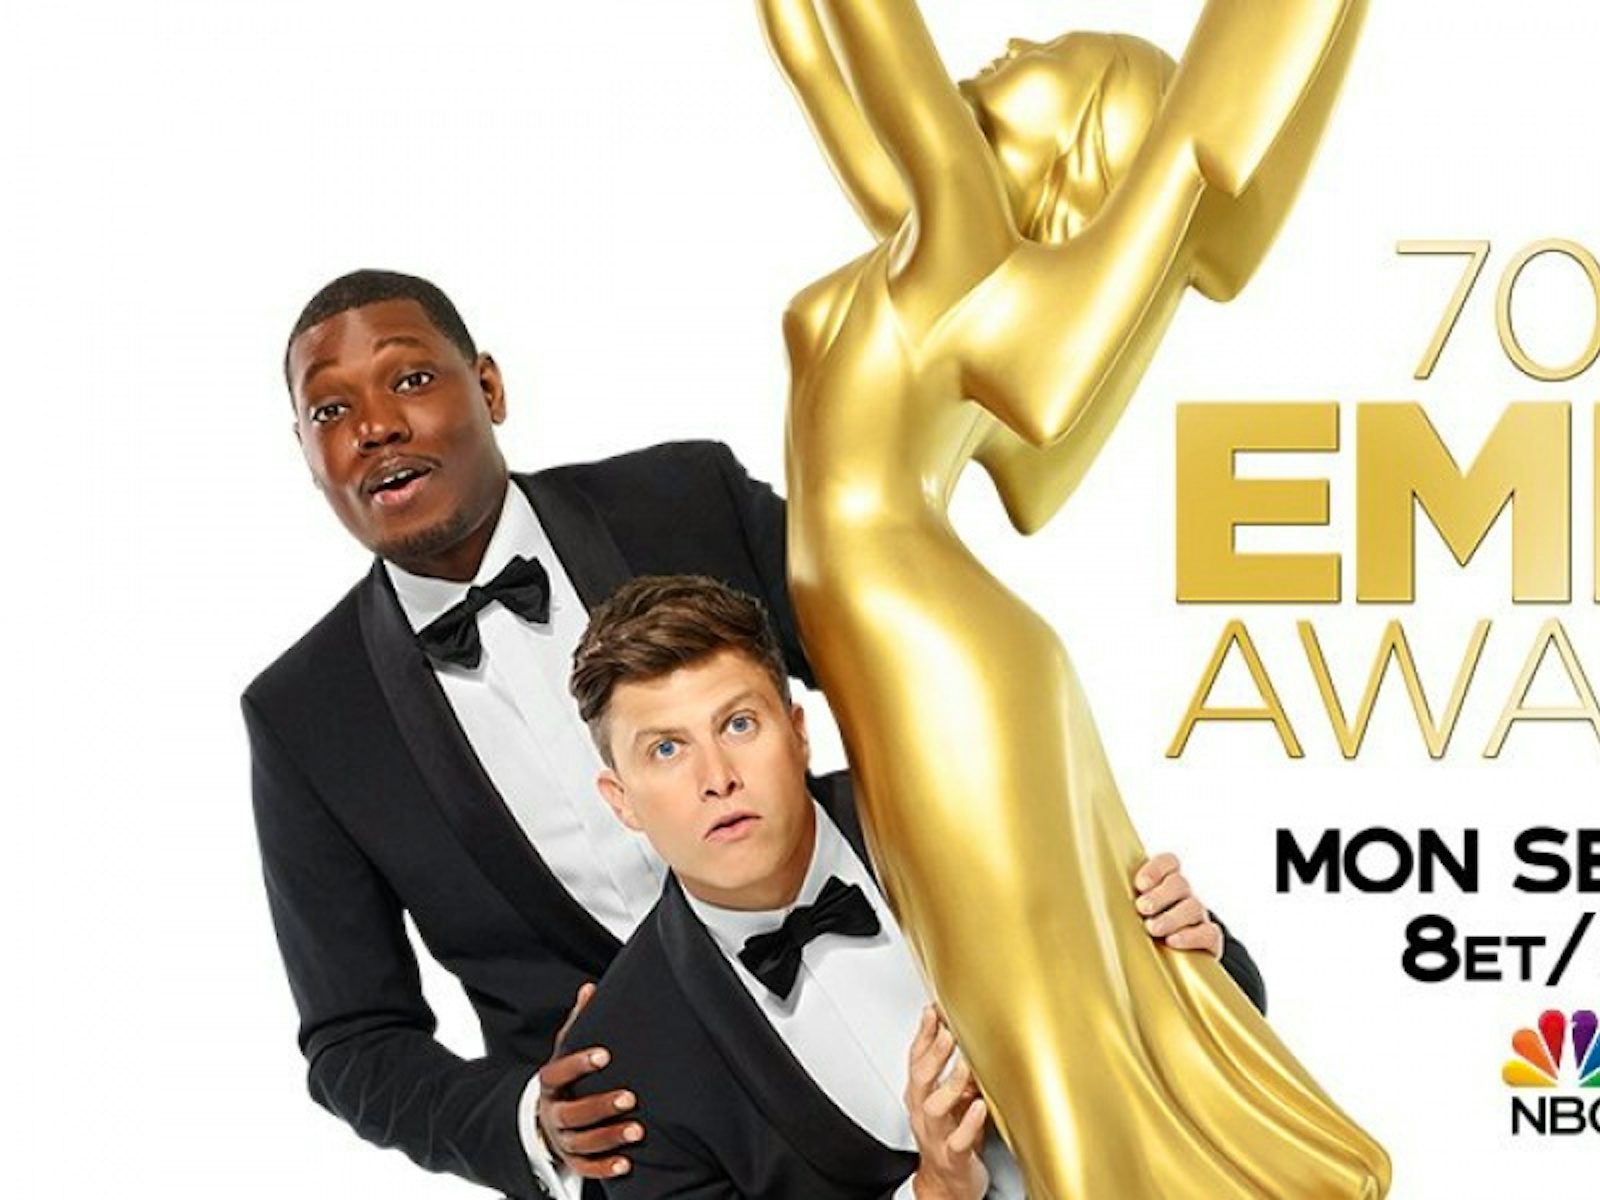 Emmys Awards to air on NBC on Monday night Reality TV World